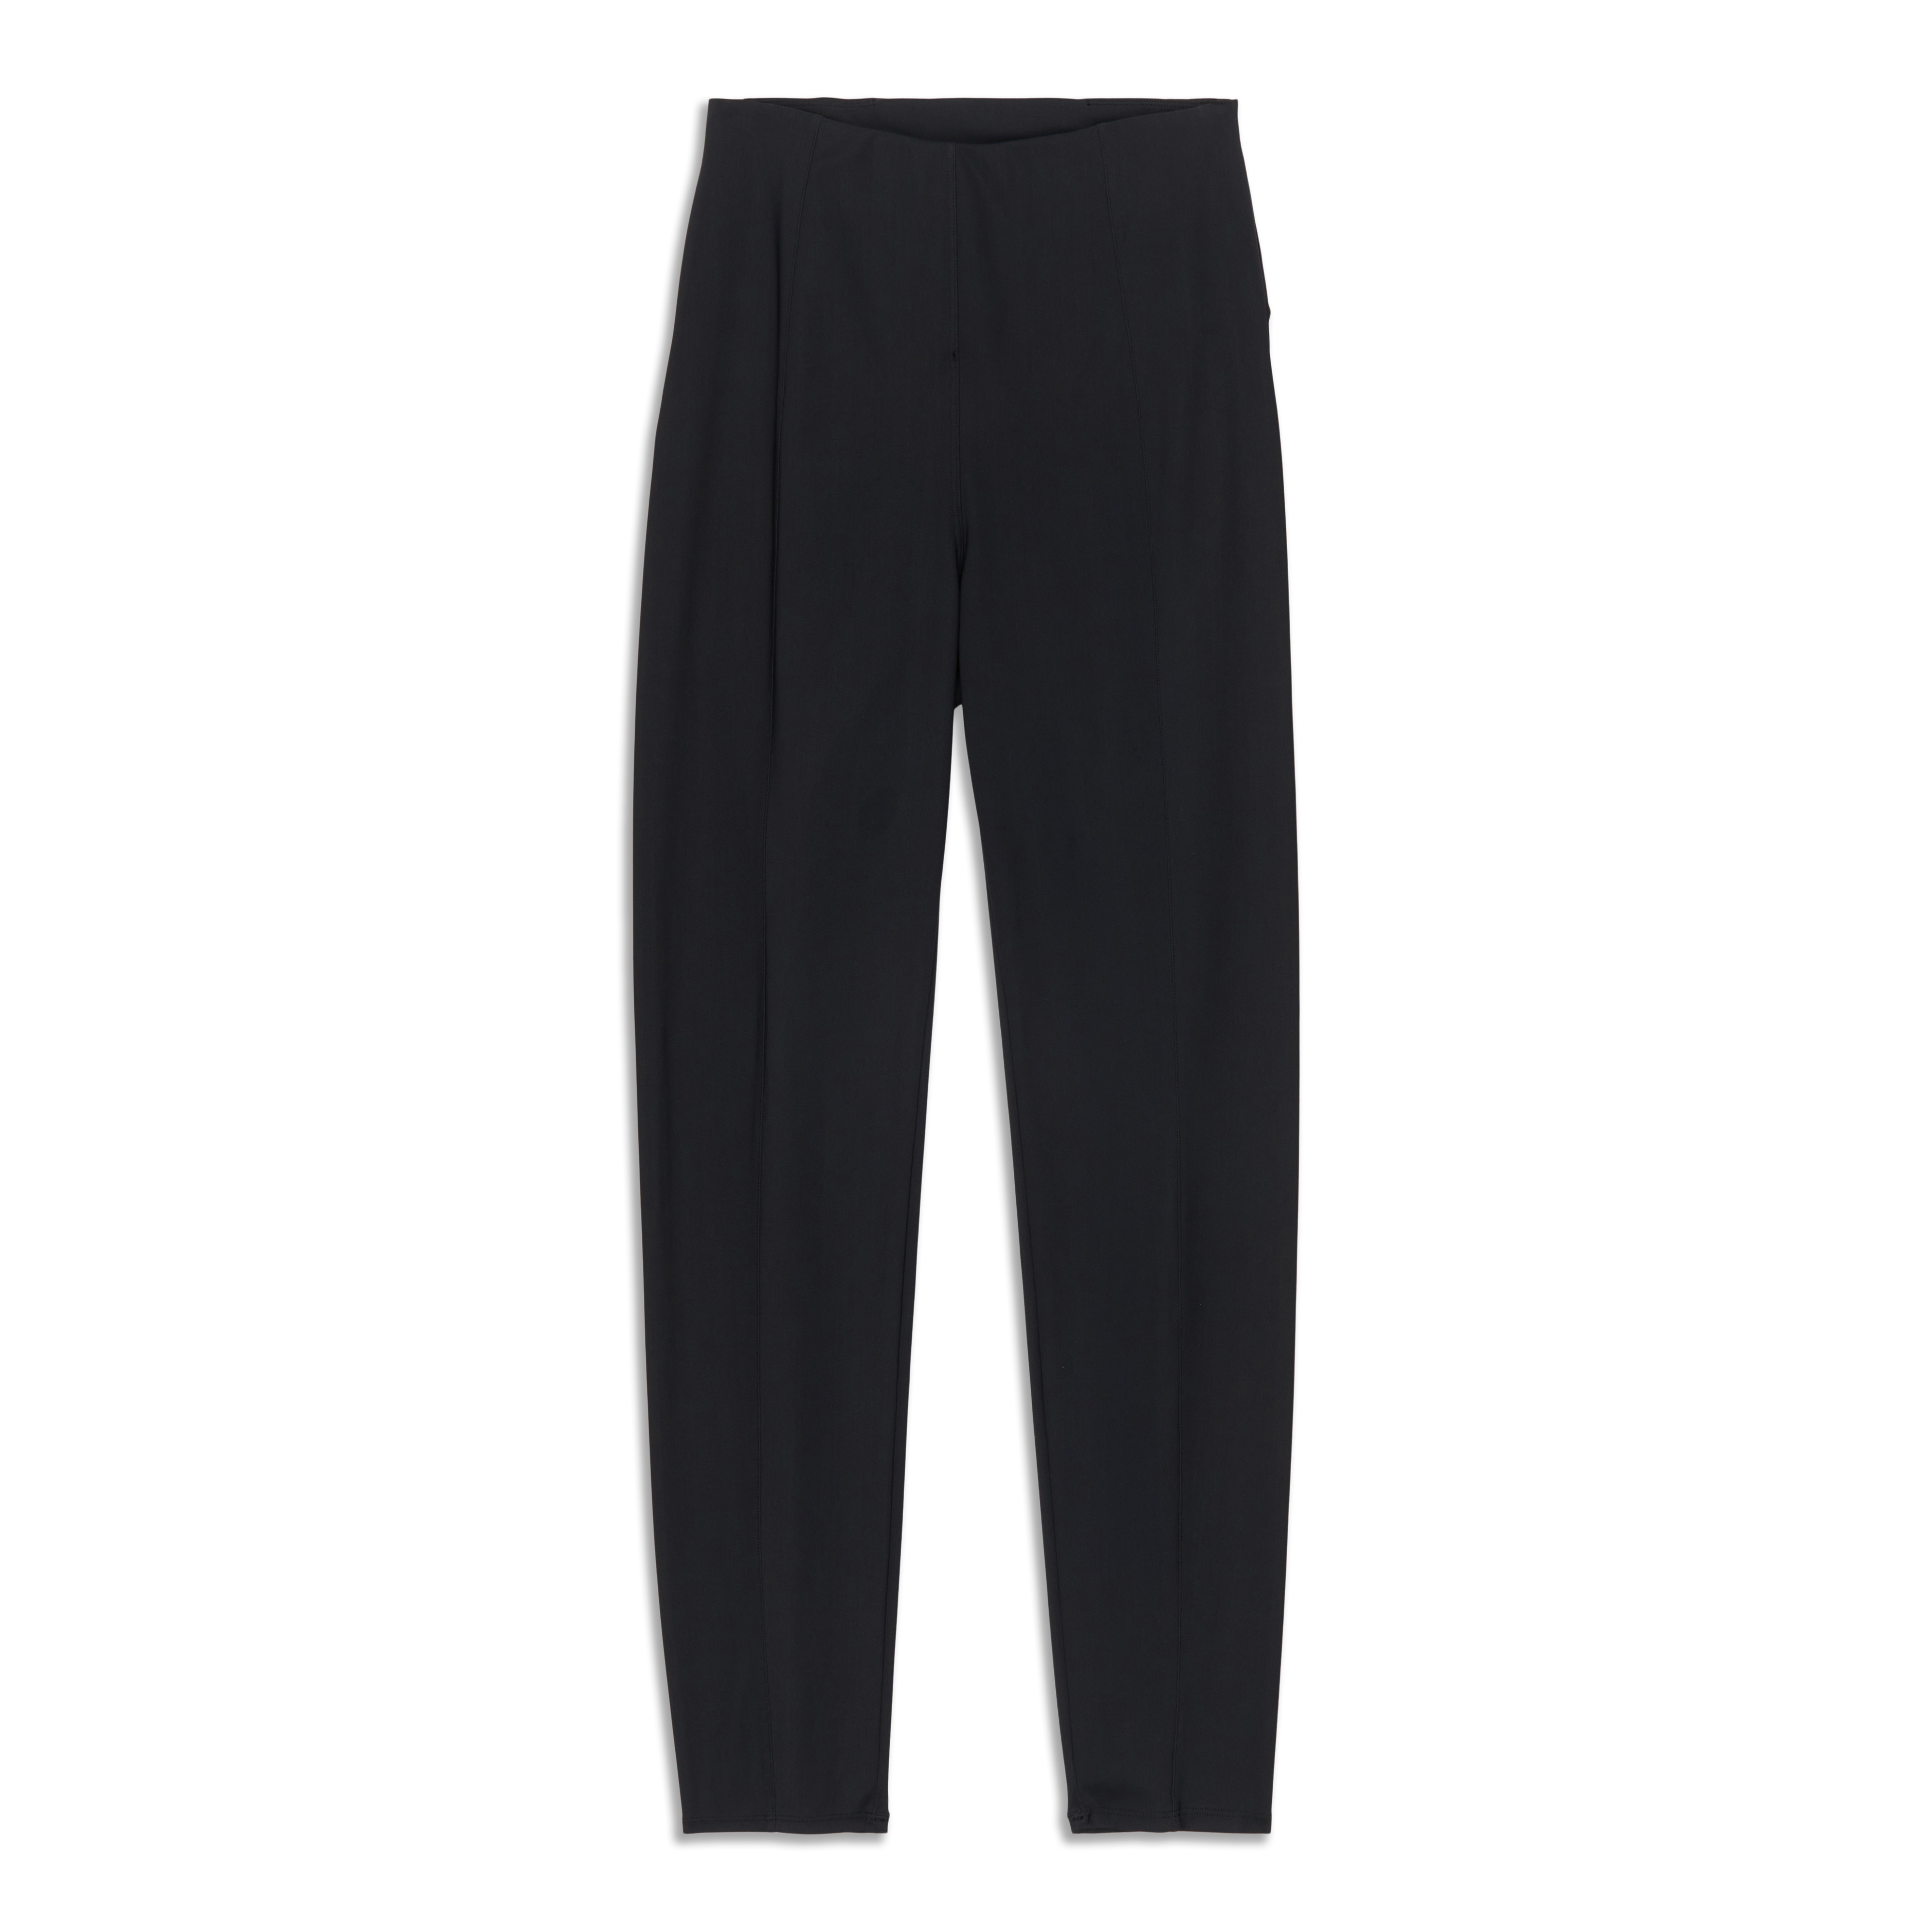 Lululemon + Here to There High-Rise 7/8 Pant